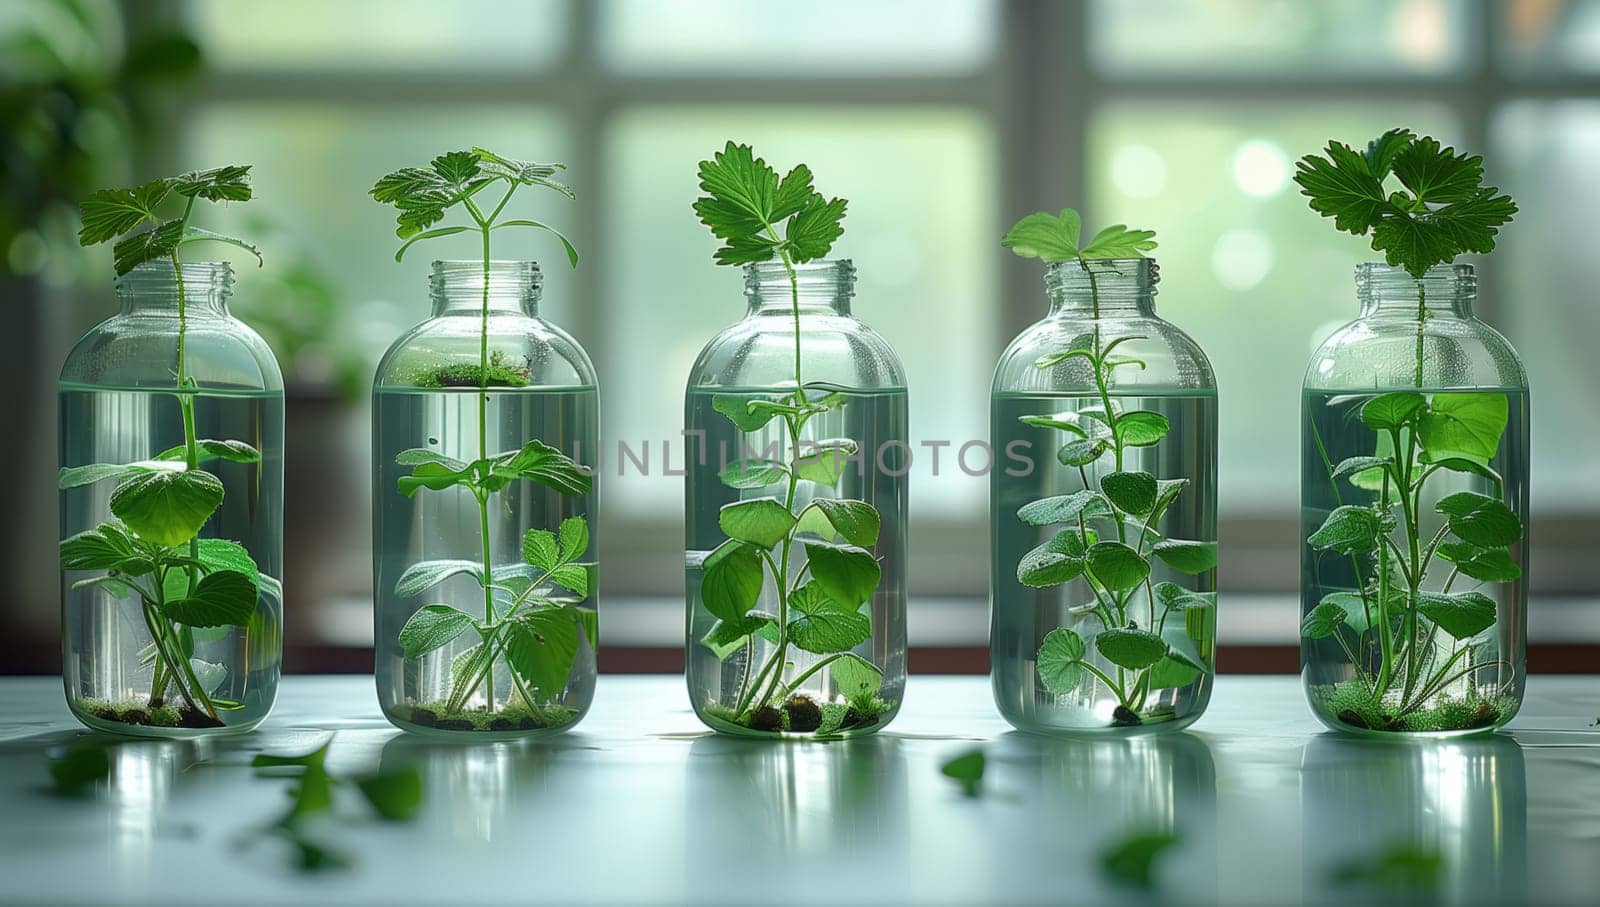 A line of glass bottles filled with water and green plants, resembling a miniature garden, placed on a table